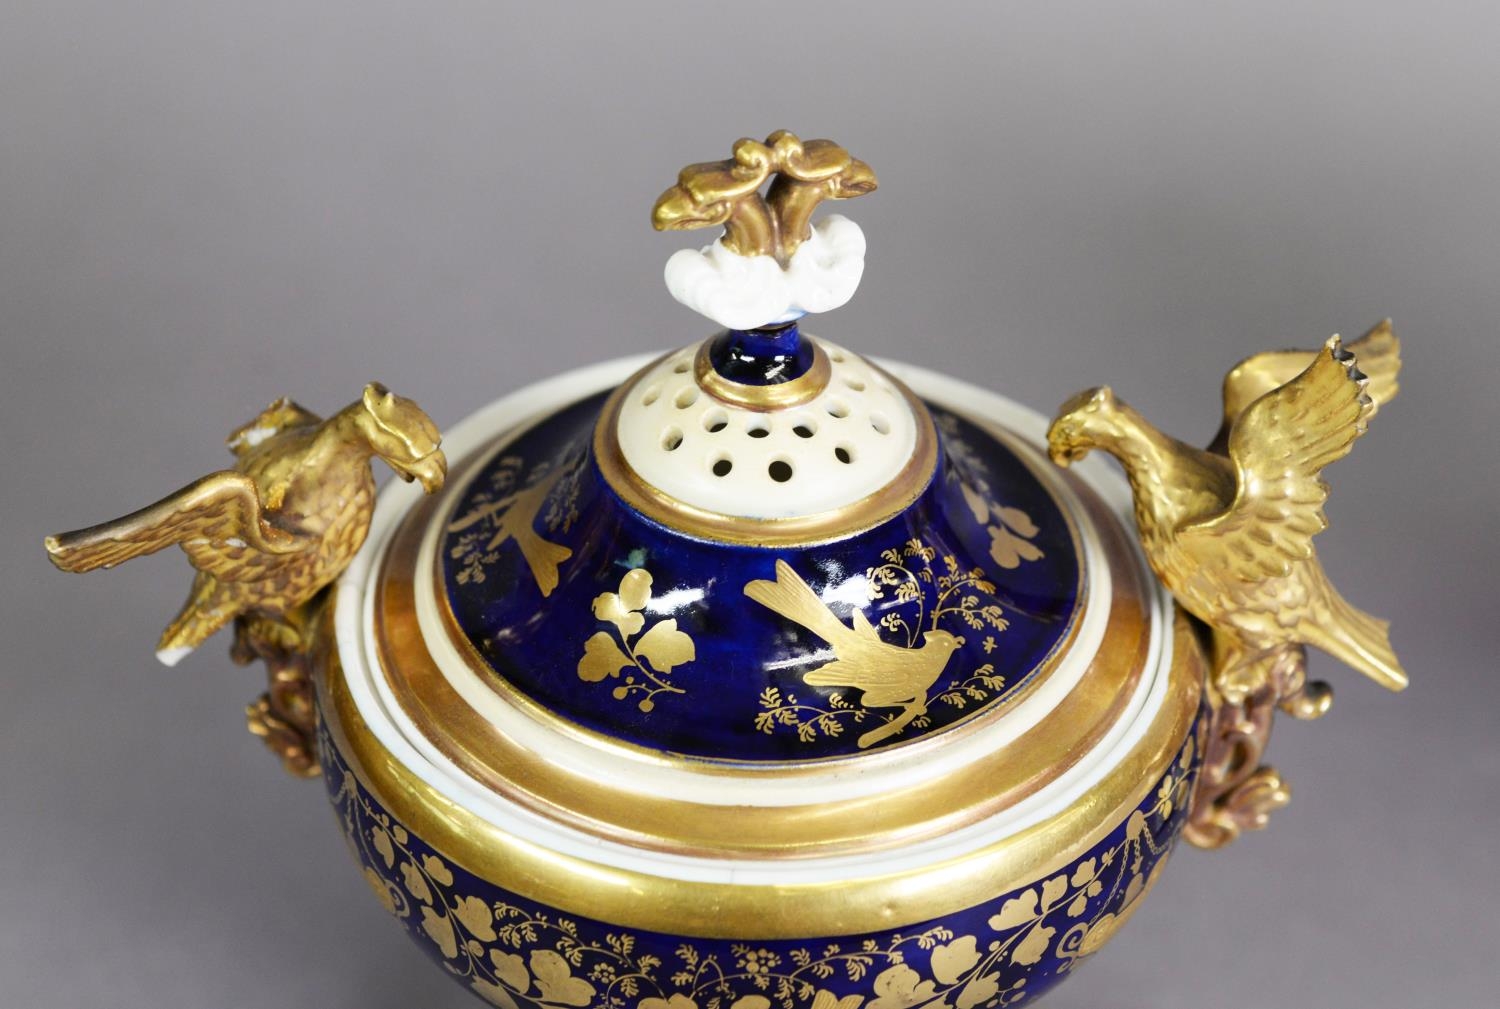 THREE PIECE LATE NINETEENTH/ EARLY TWENTIETH CENTURY PORCELAIN GARNITURE OF TWO HANDLED PEDESTAL POT - Image 3 of 3